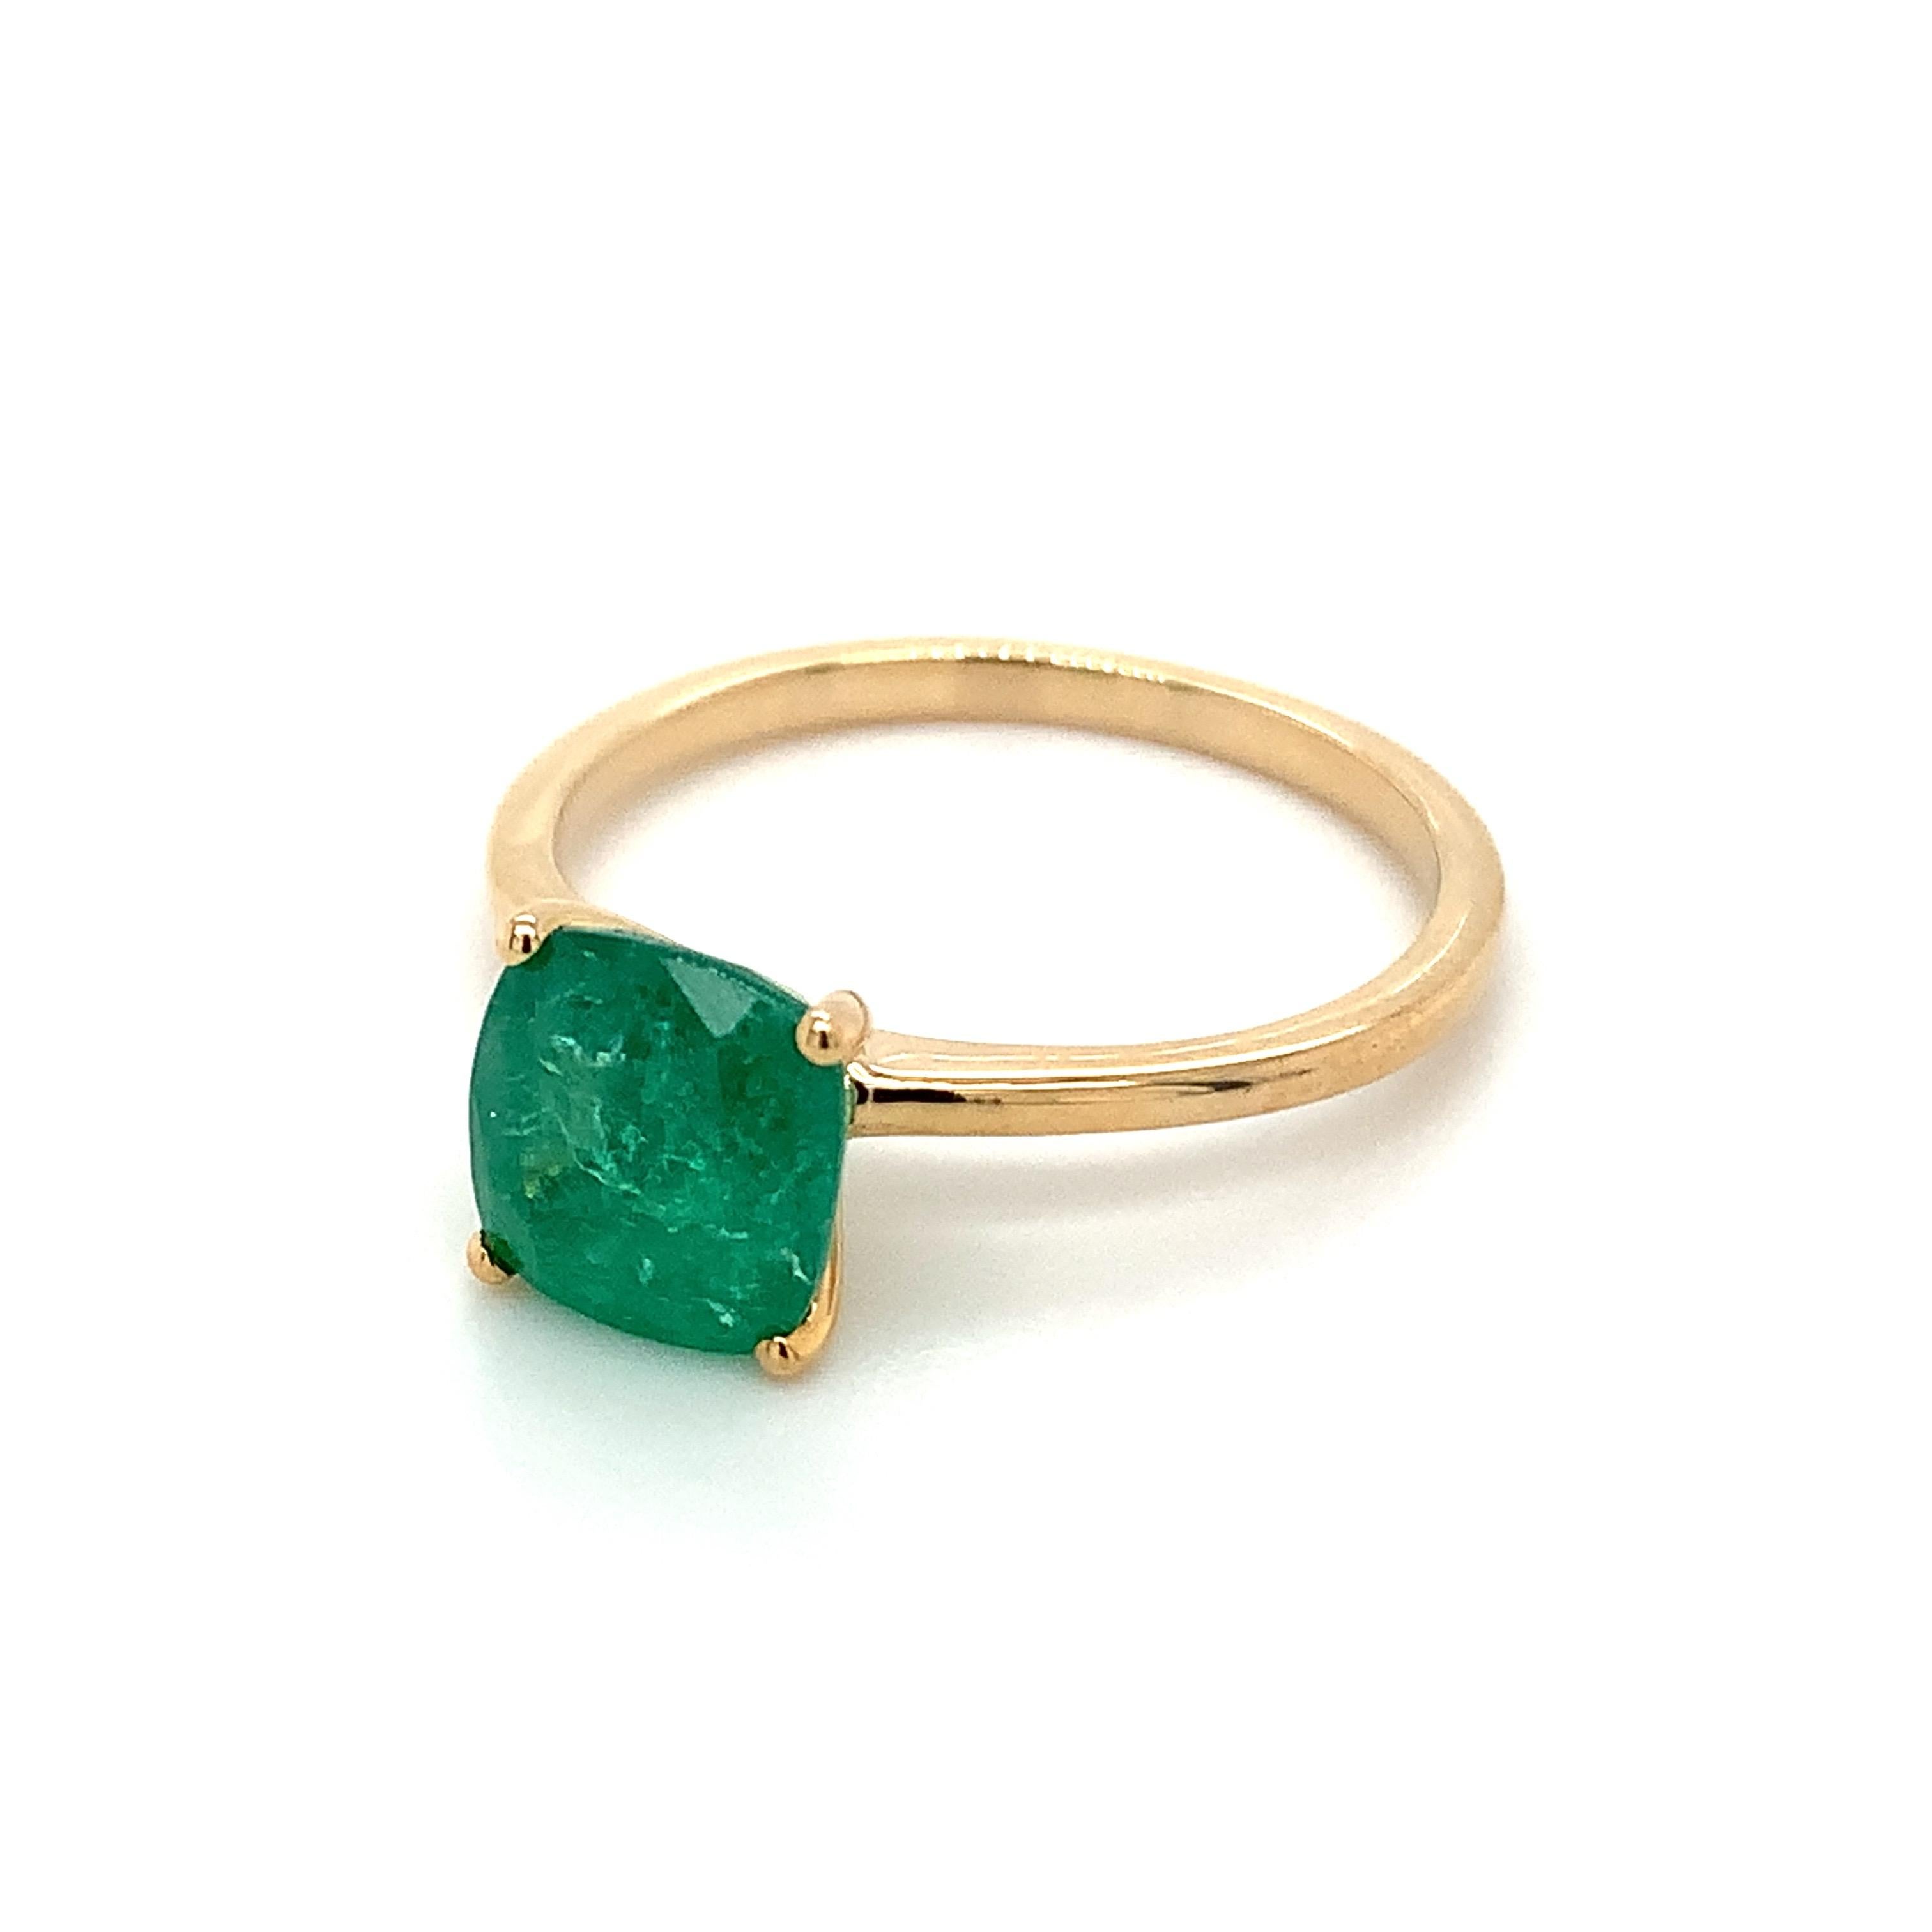 Cushion shape emerald gemstone beautifully crafted in a 10K yellow gold ring.

With a vibrant green color hue. The birthstone for May is a symbol of renewed spring growth. Explore a vast range of precious stone Jewelry in our store. 

Centre stone